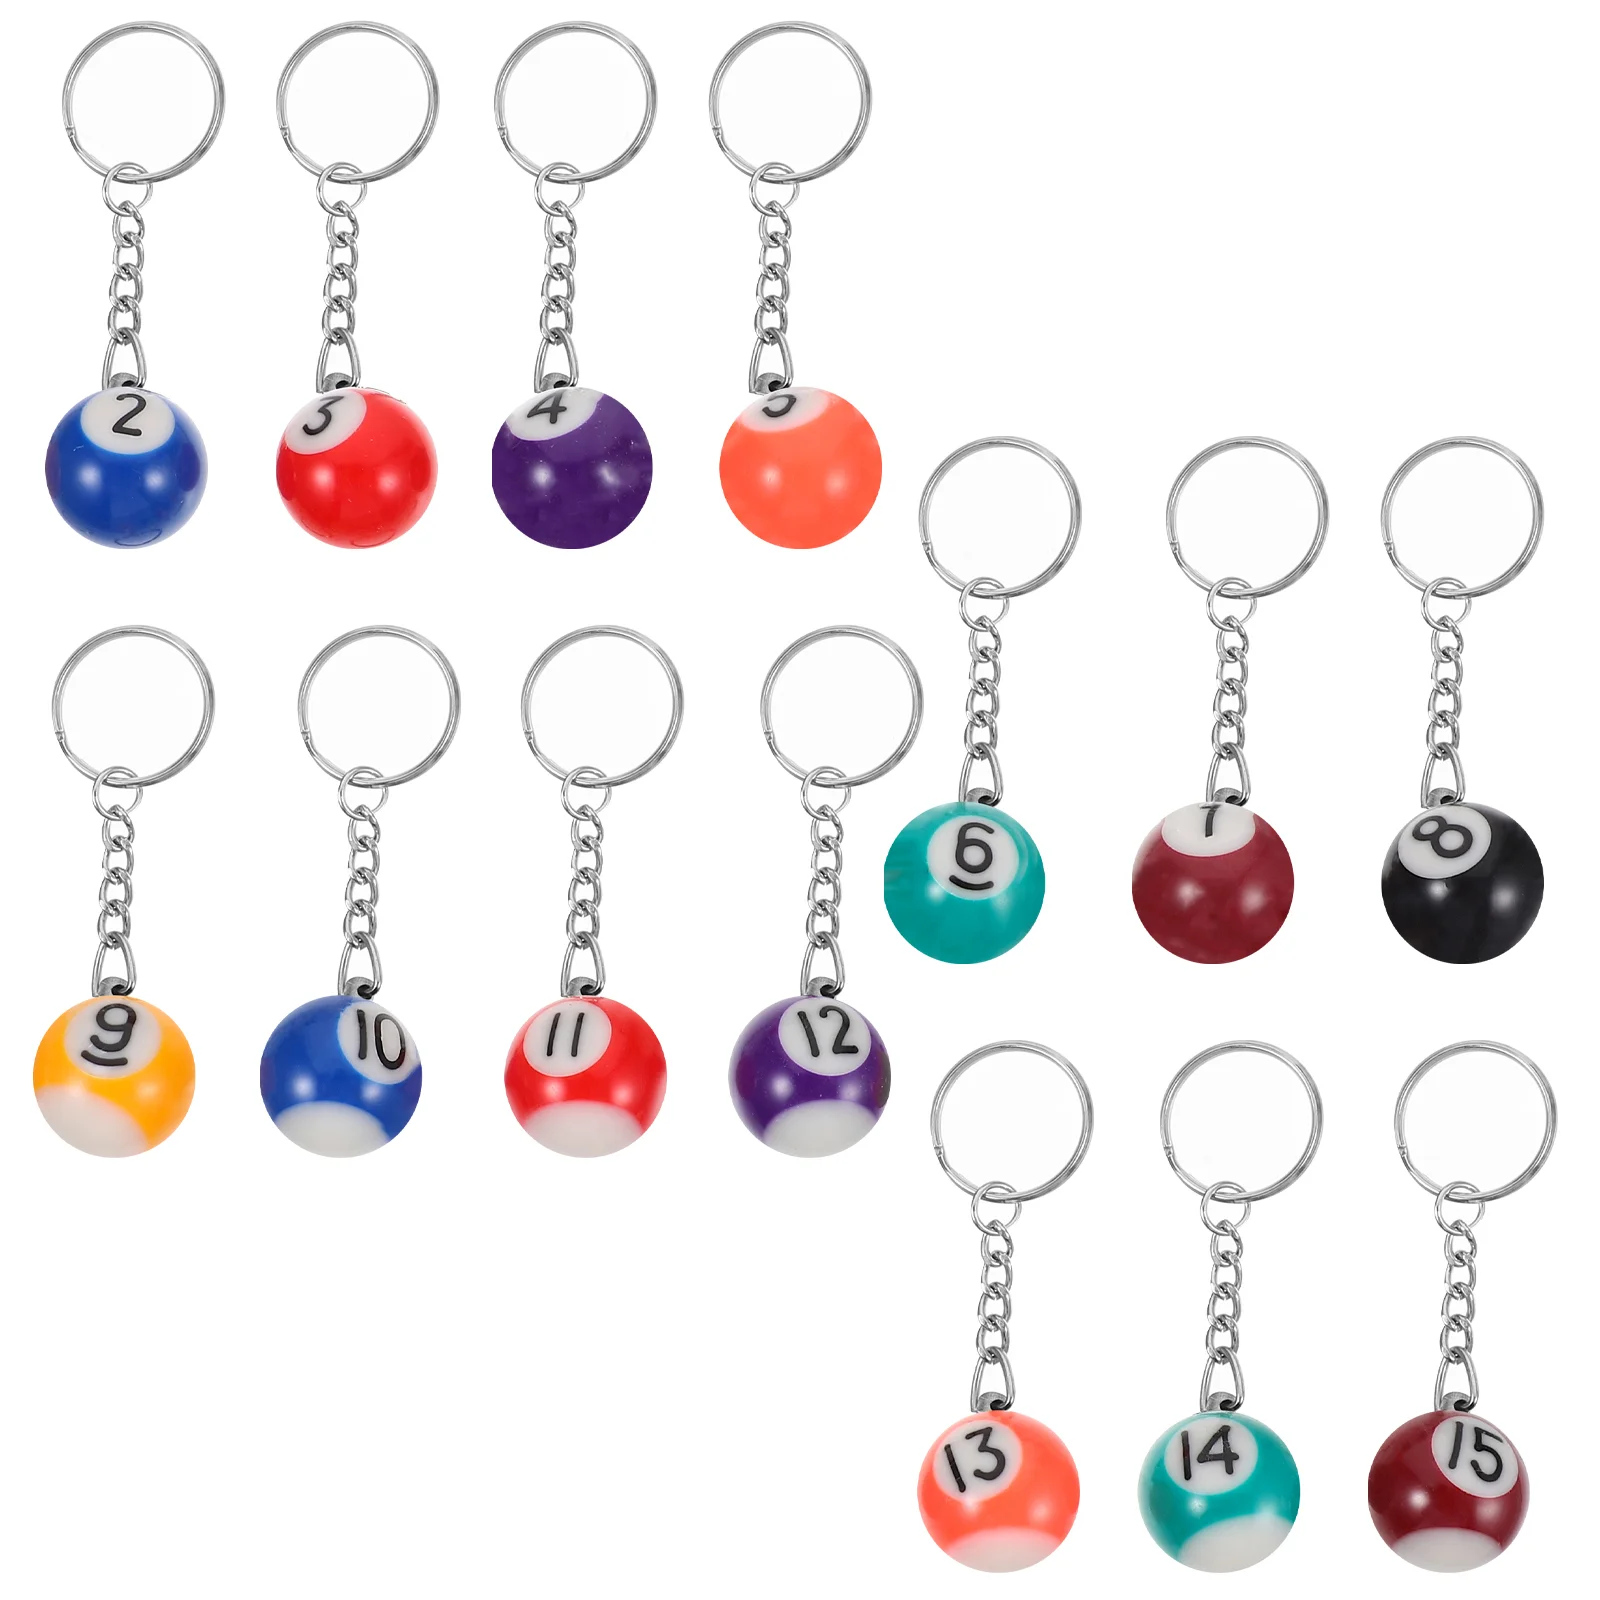 

16 Pcs Billiards Keychain Hanging Decors Small Keychains Ornaments Gift Delicate Alloy Rings